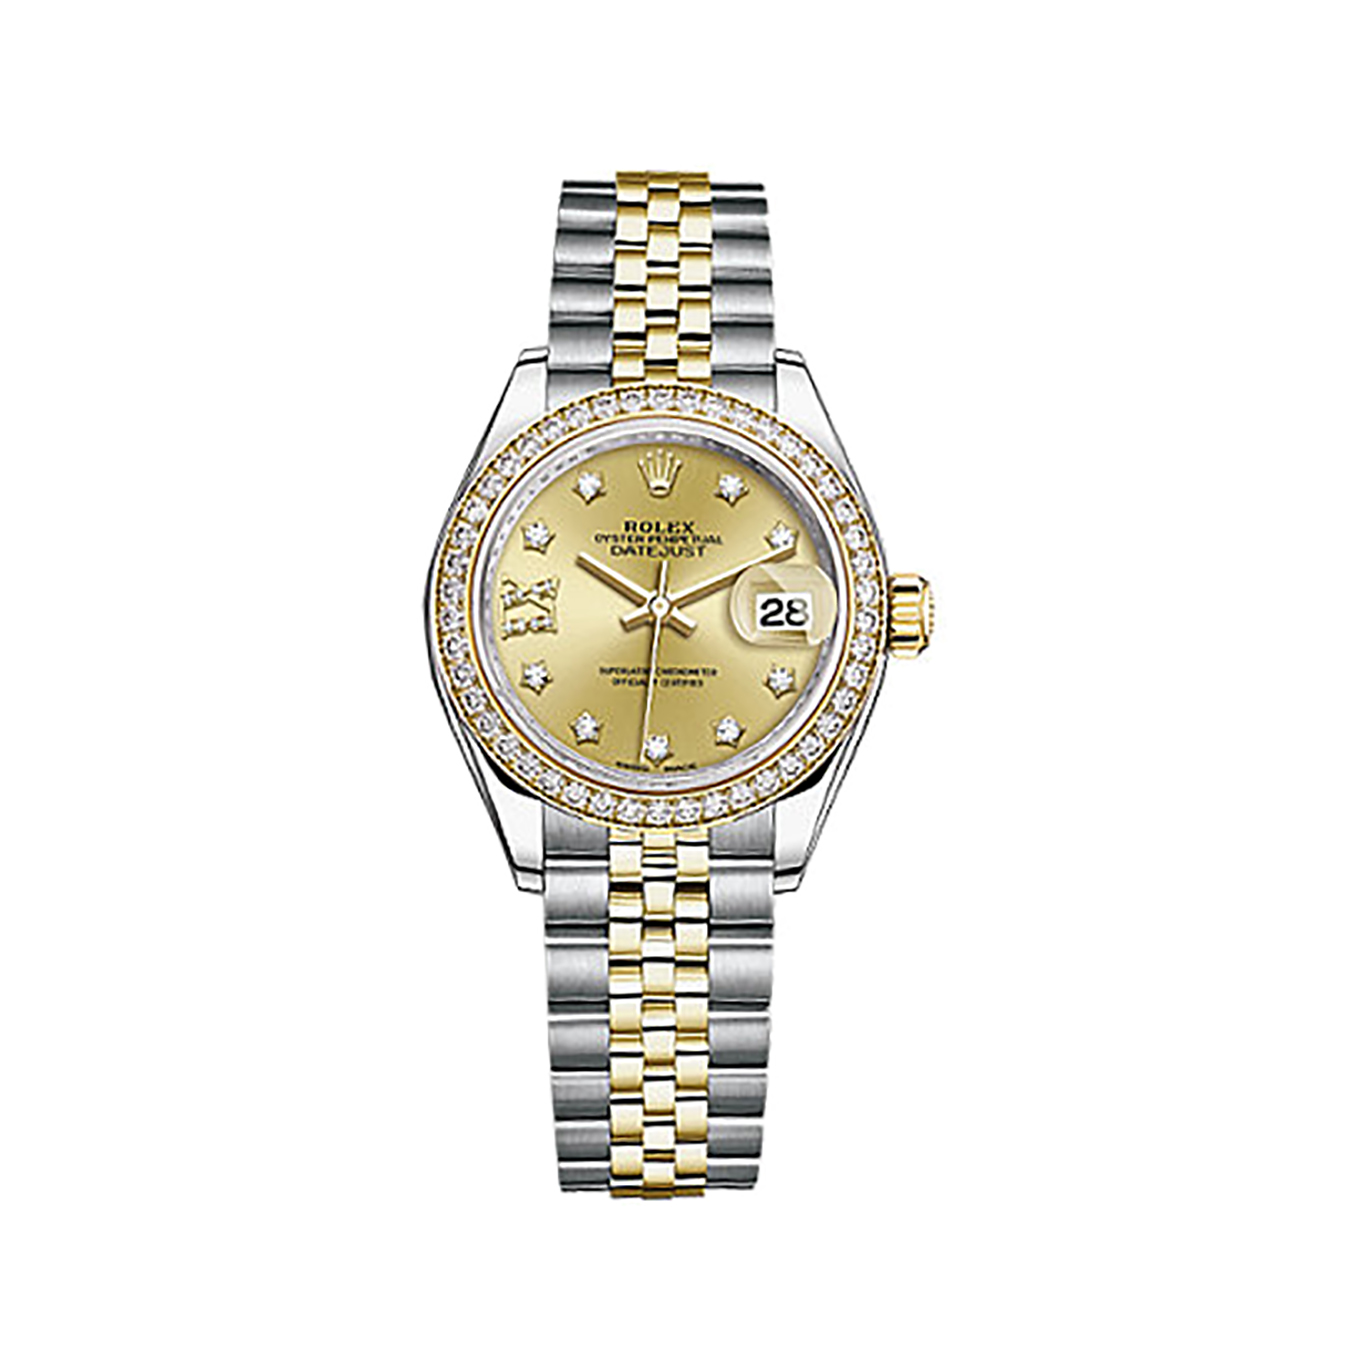 Lady-Datejust 28 279383RBR Gold & Stainless Steel & Diamonds Watch (Champagne Set with Diamonds)